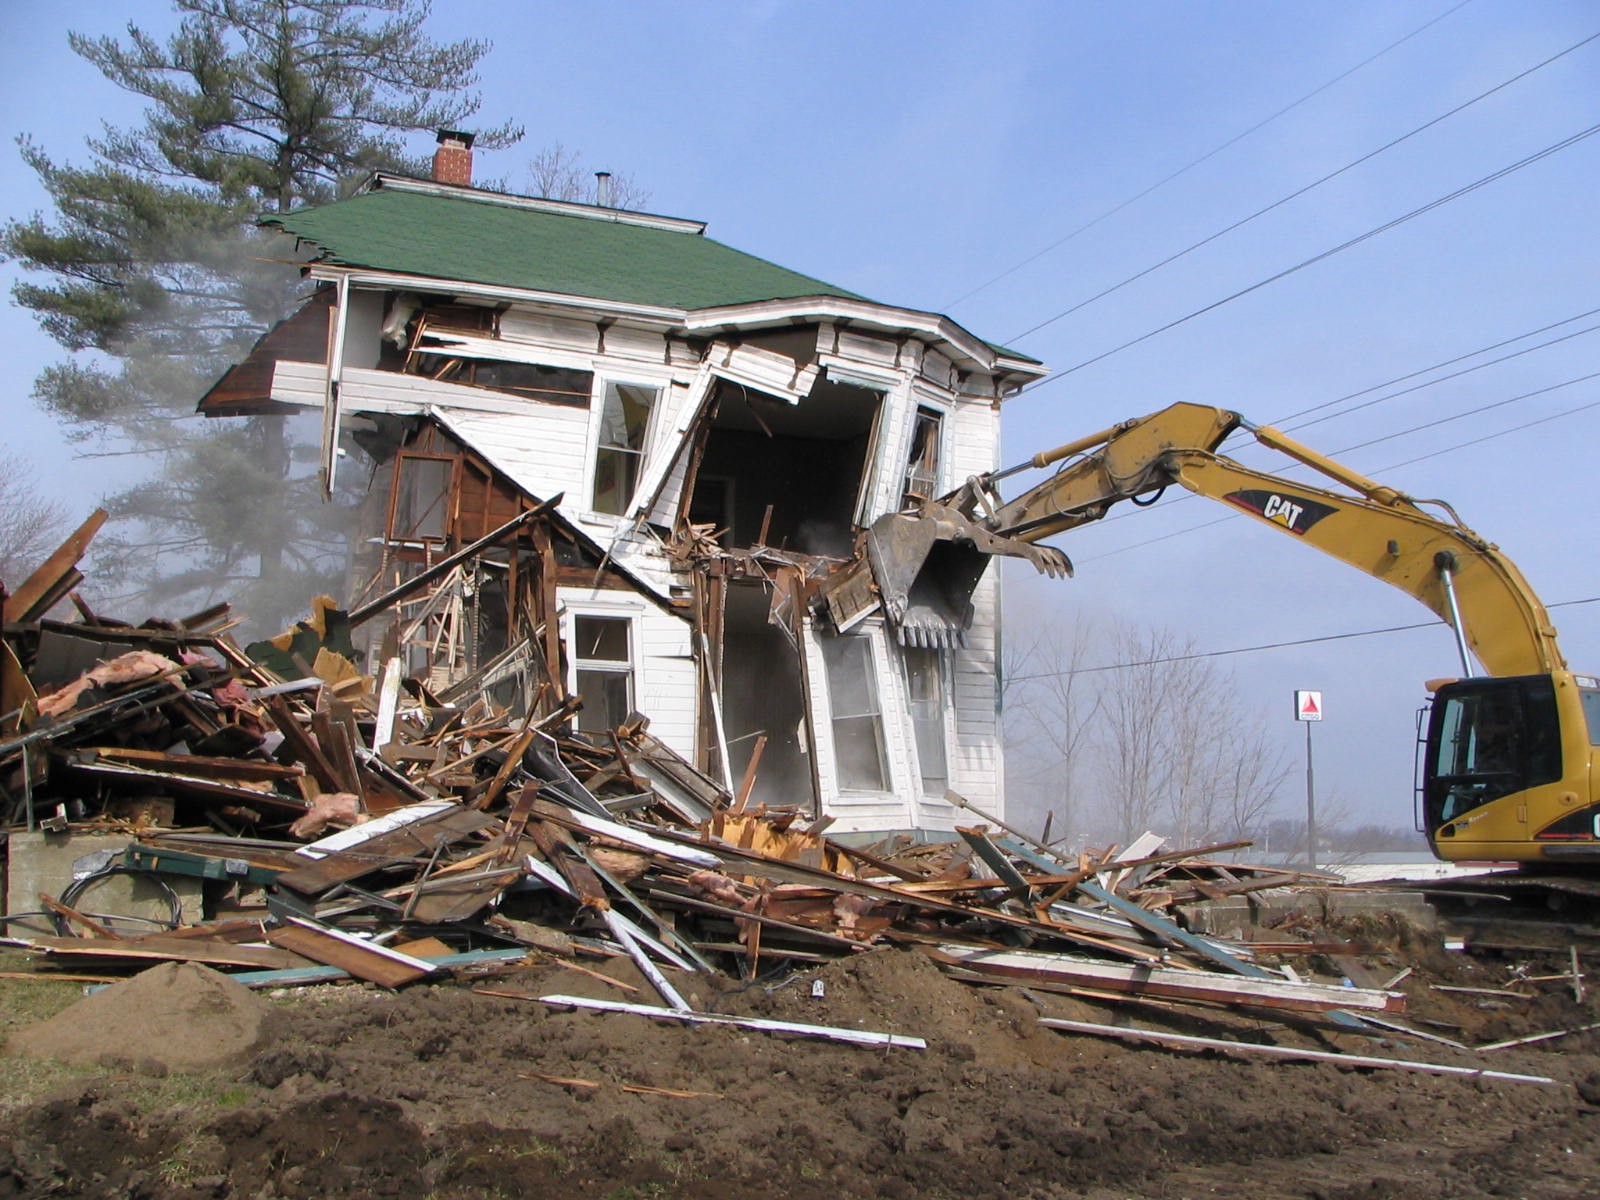 A photograph of a house being torn down by an excavator.